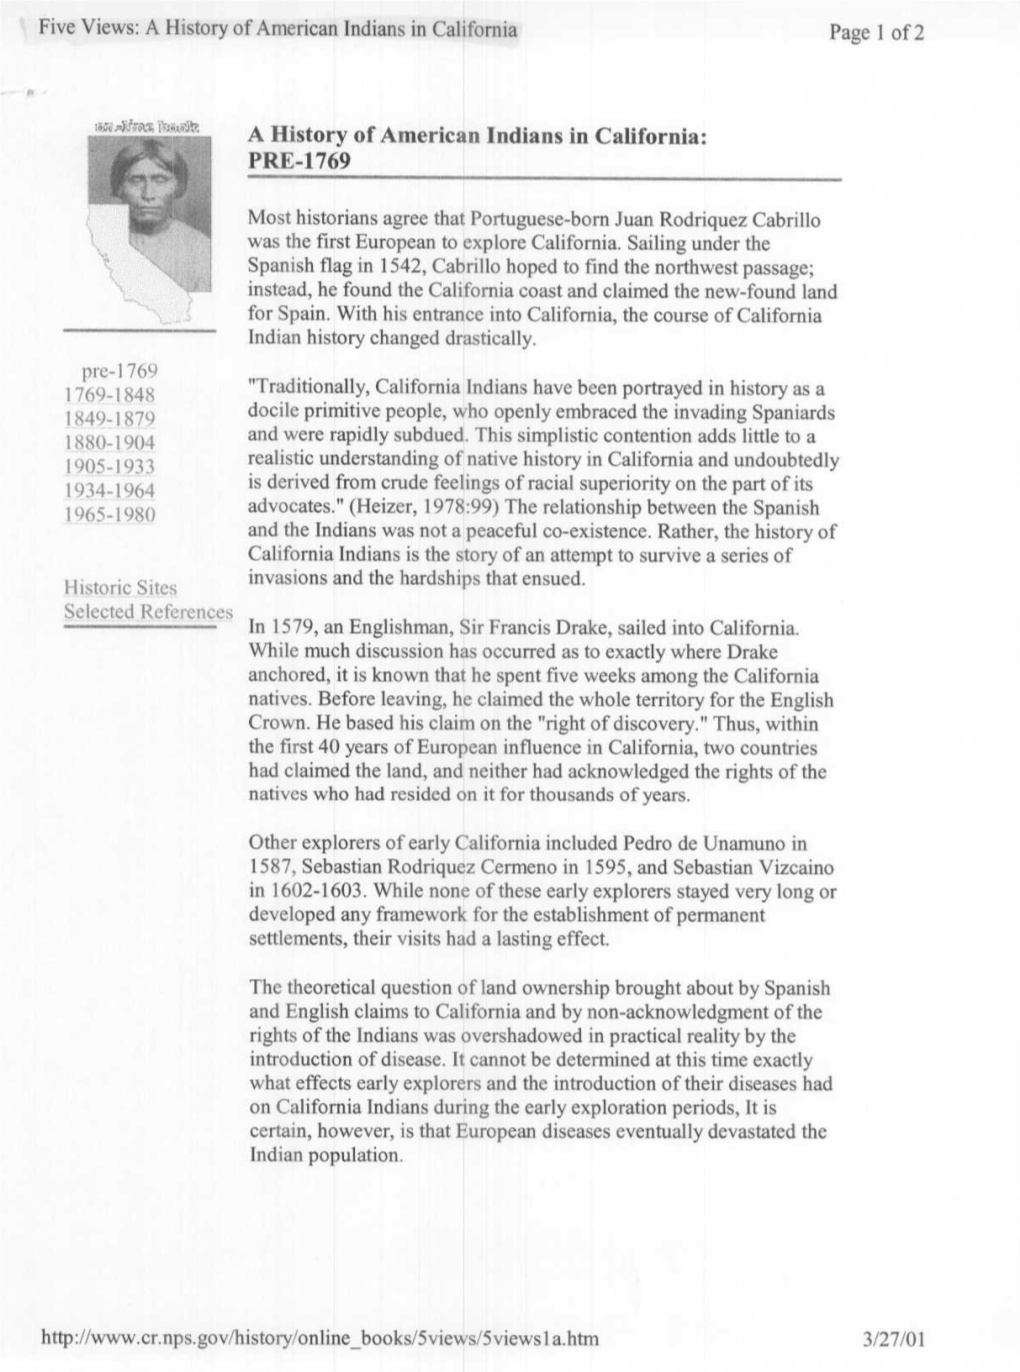 History of American Indians in California Page 1 of 2